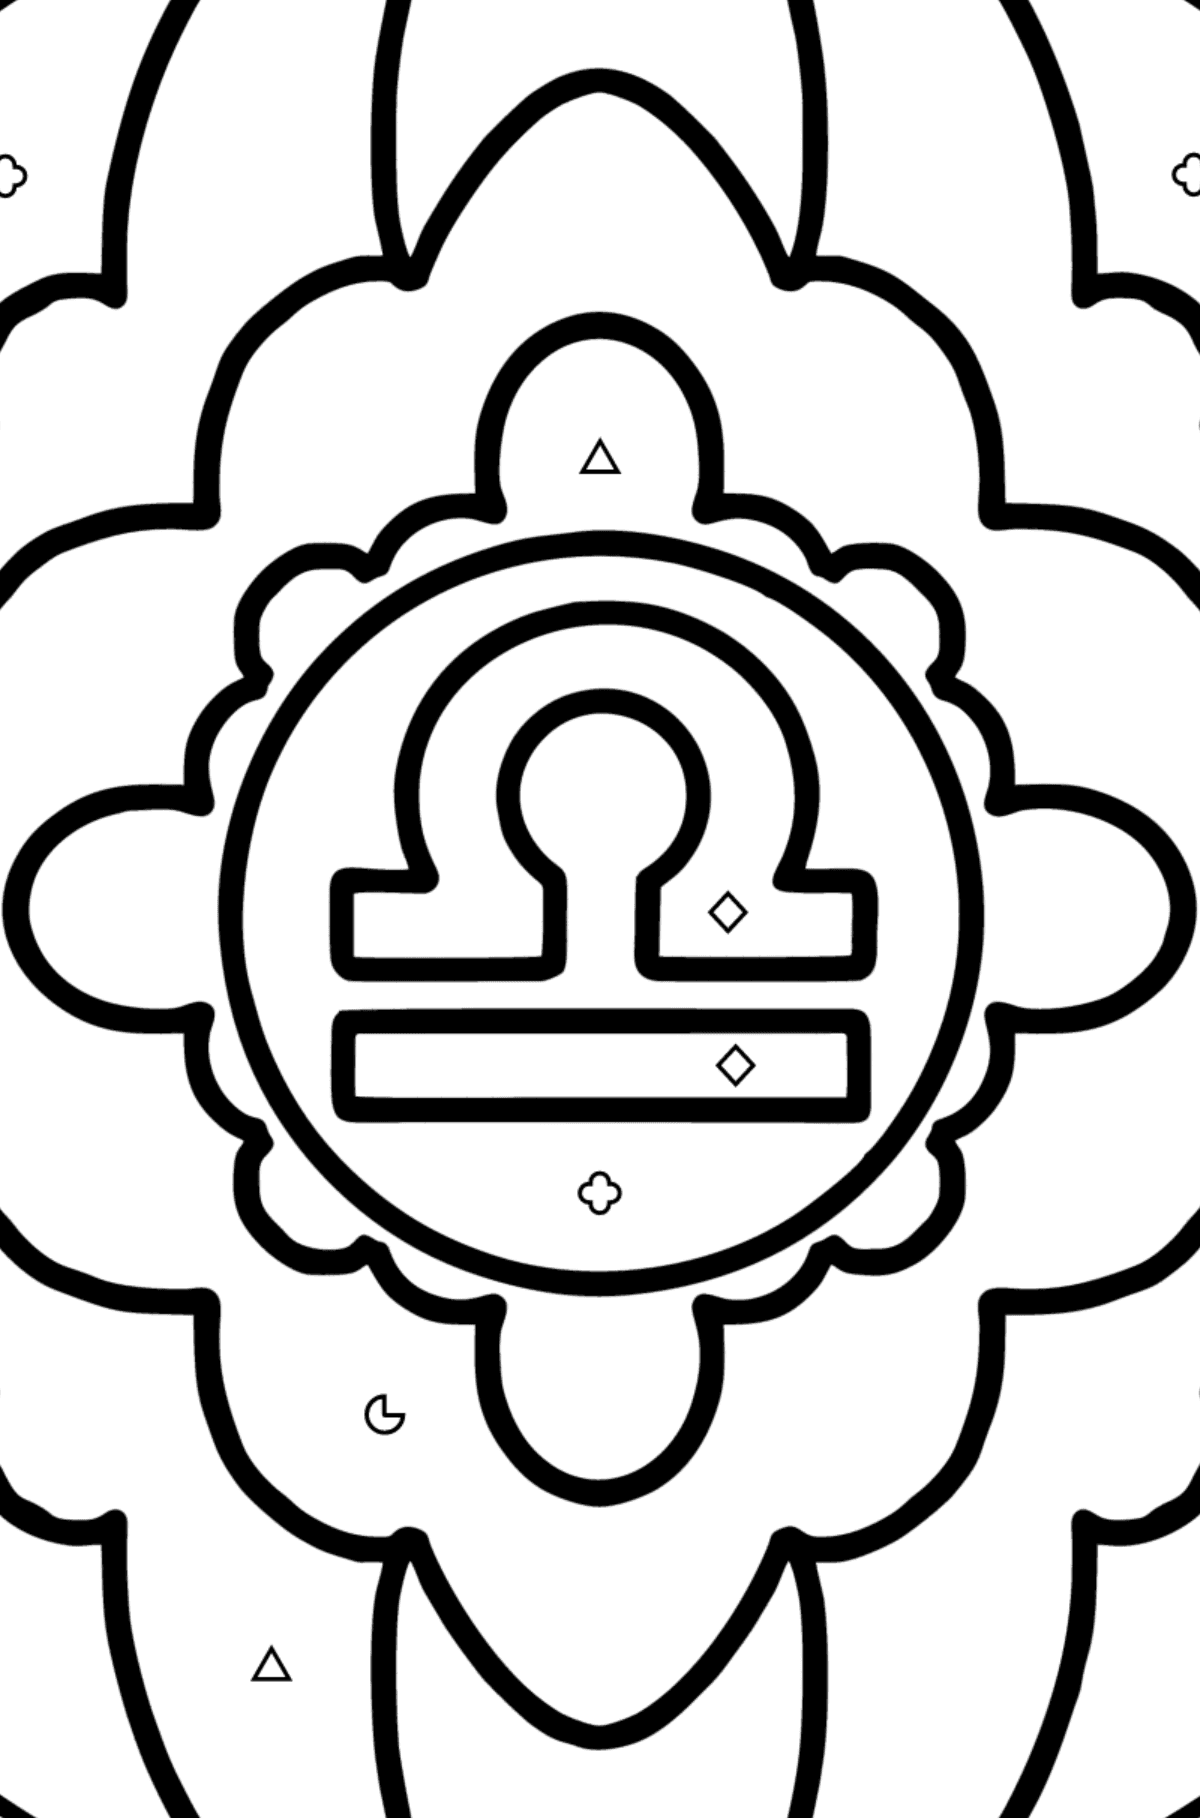 Coloring page - zodiac sign Libra - Coloring by Geometric Shapes for Kids